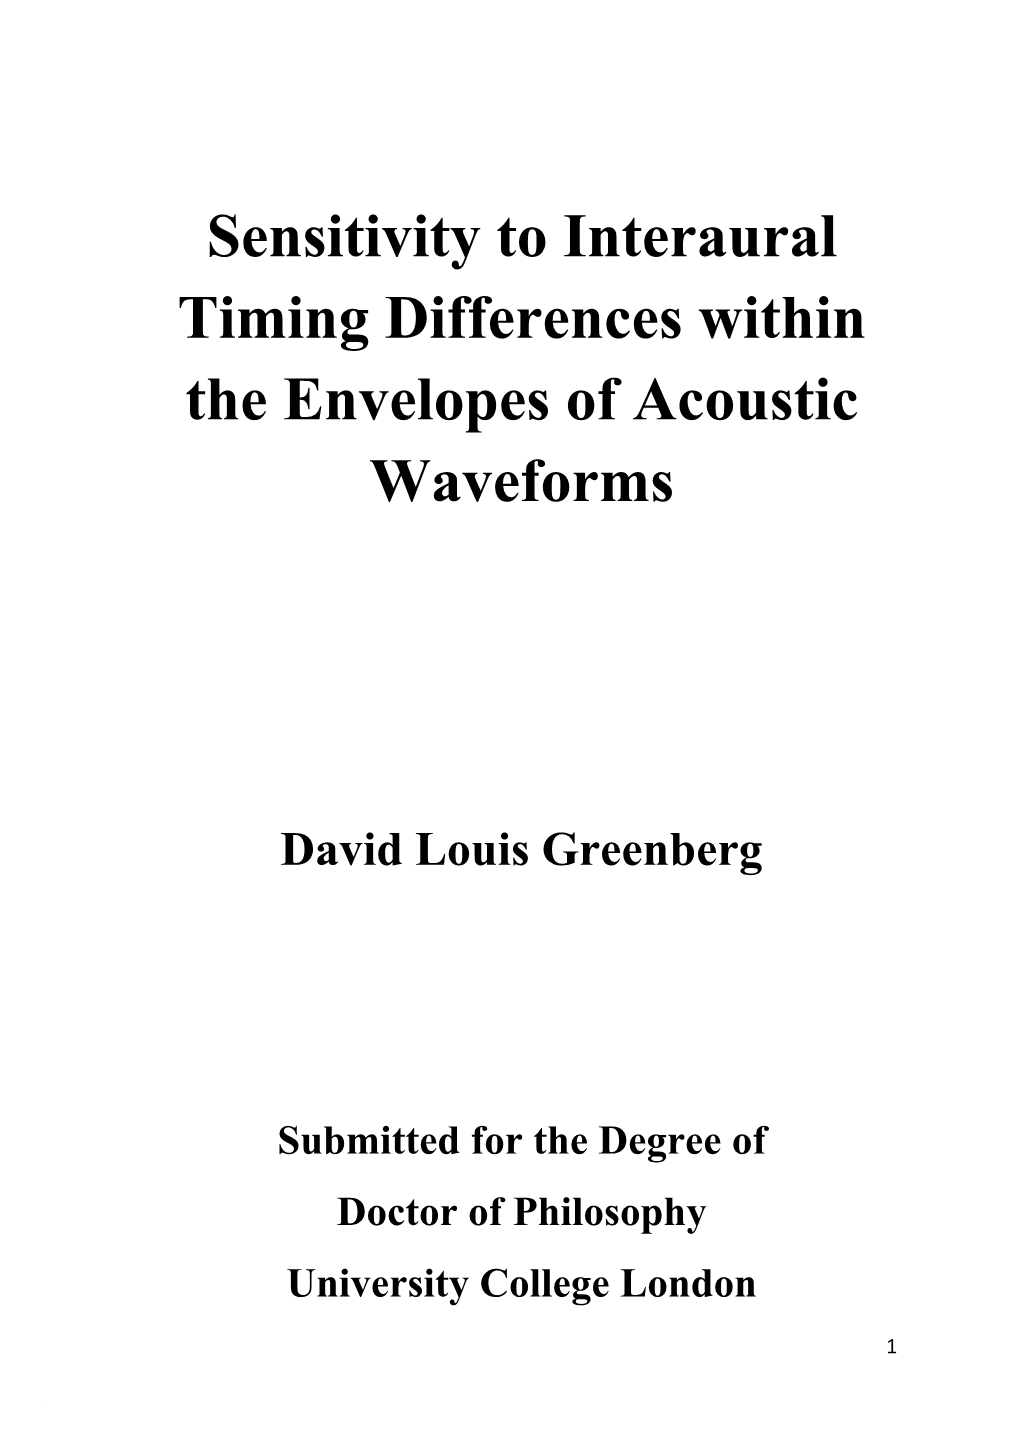 Sensitivity to Interaural Timing Differences Within the Envelopes of Acoustic Waveforms